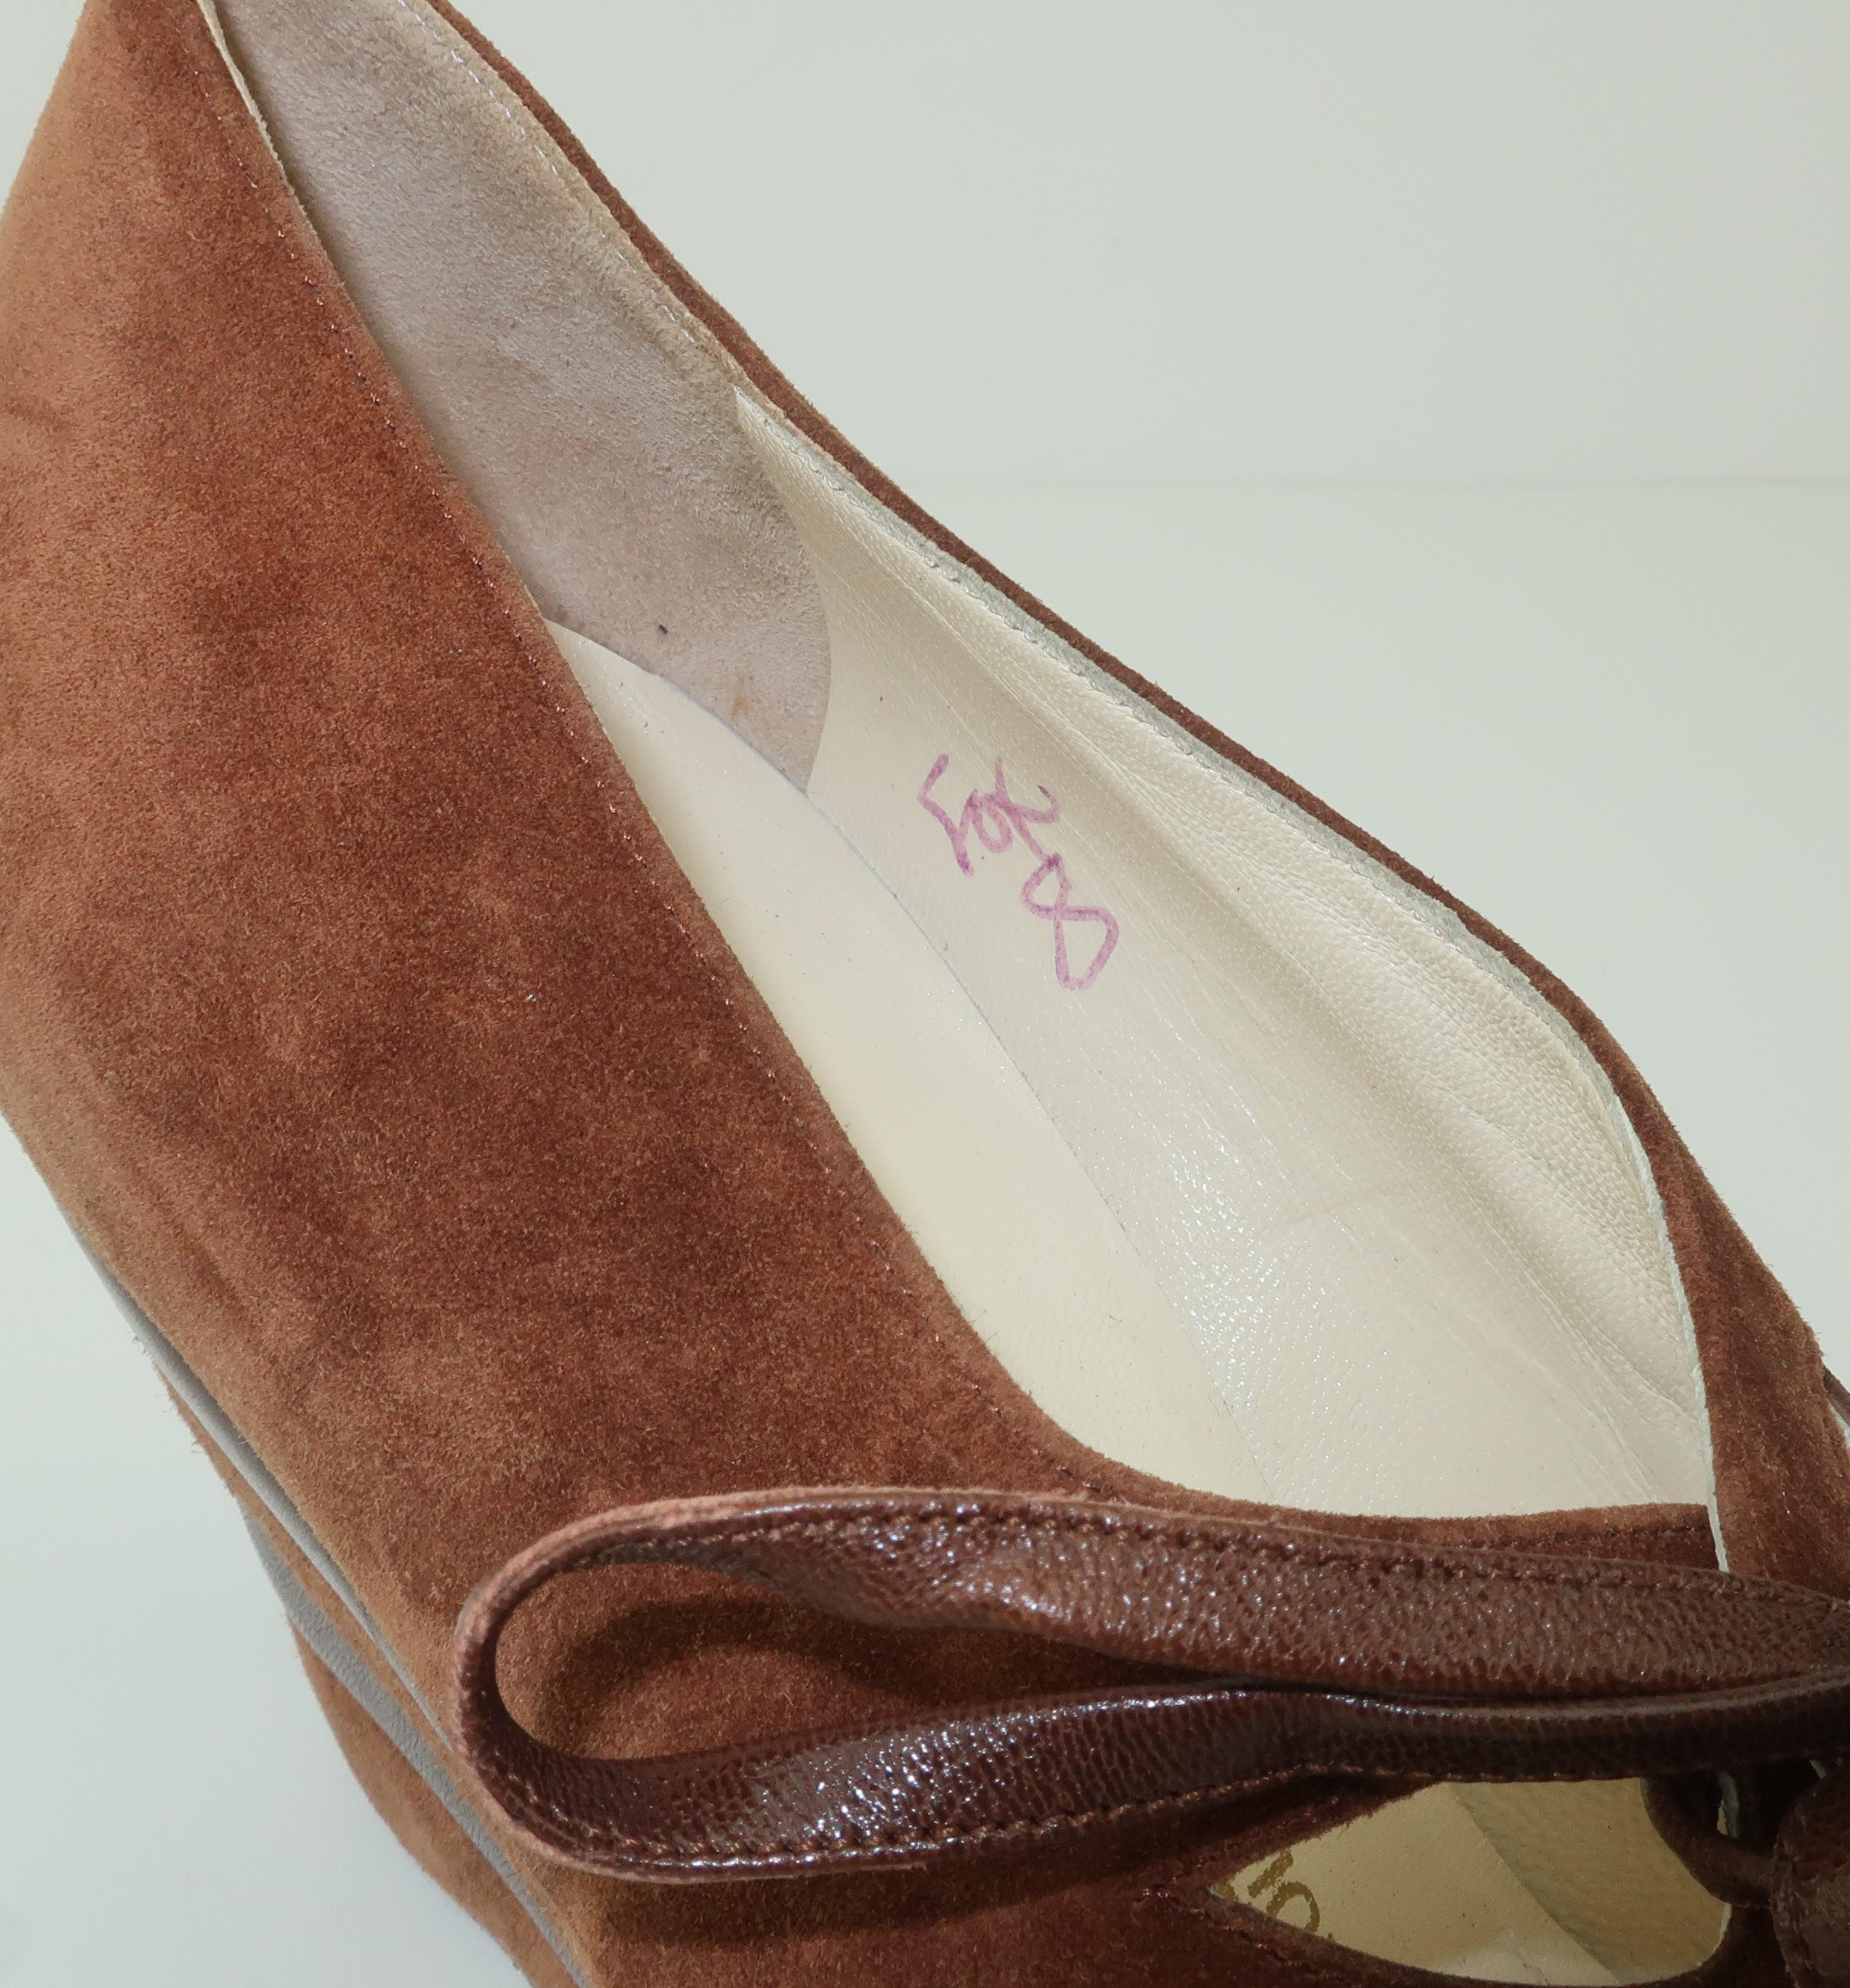 Ferragamo Creations Limited Edition 1940's Style Brown Suede Wedge Shoes Sz 8 4